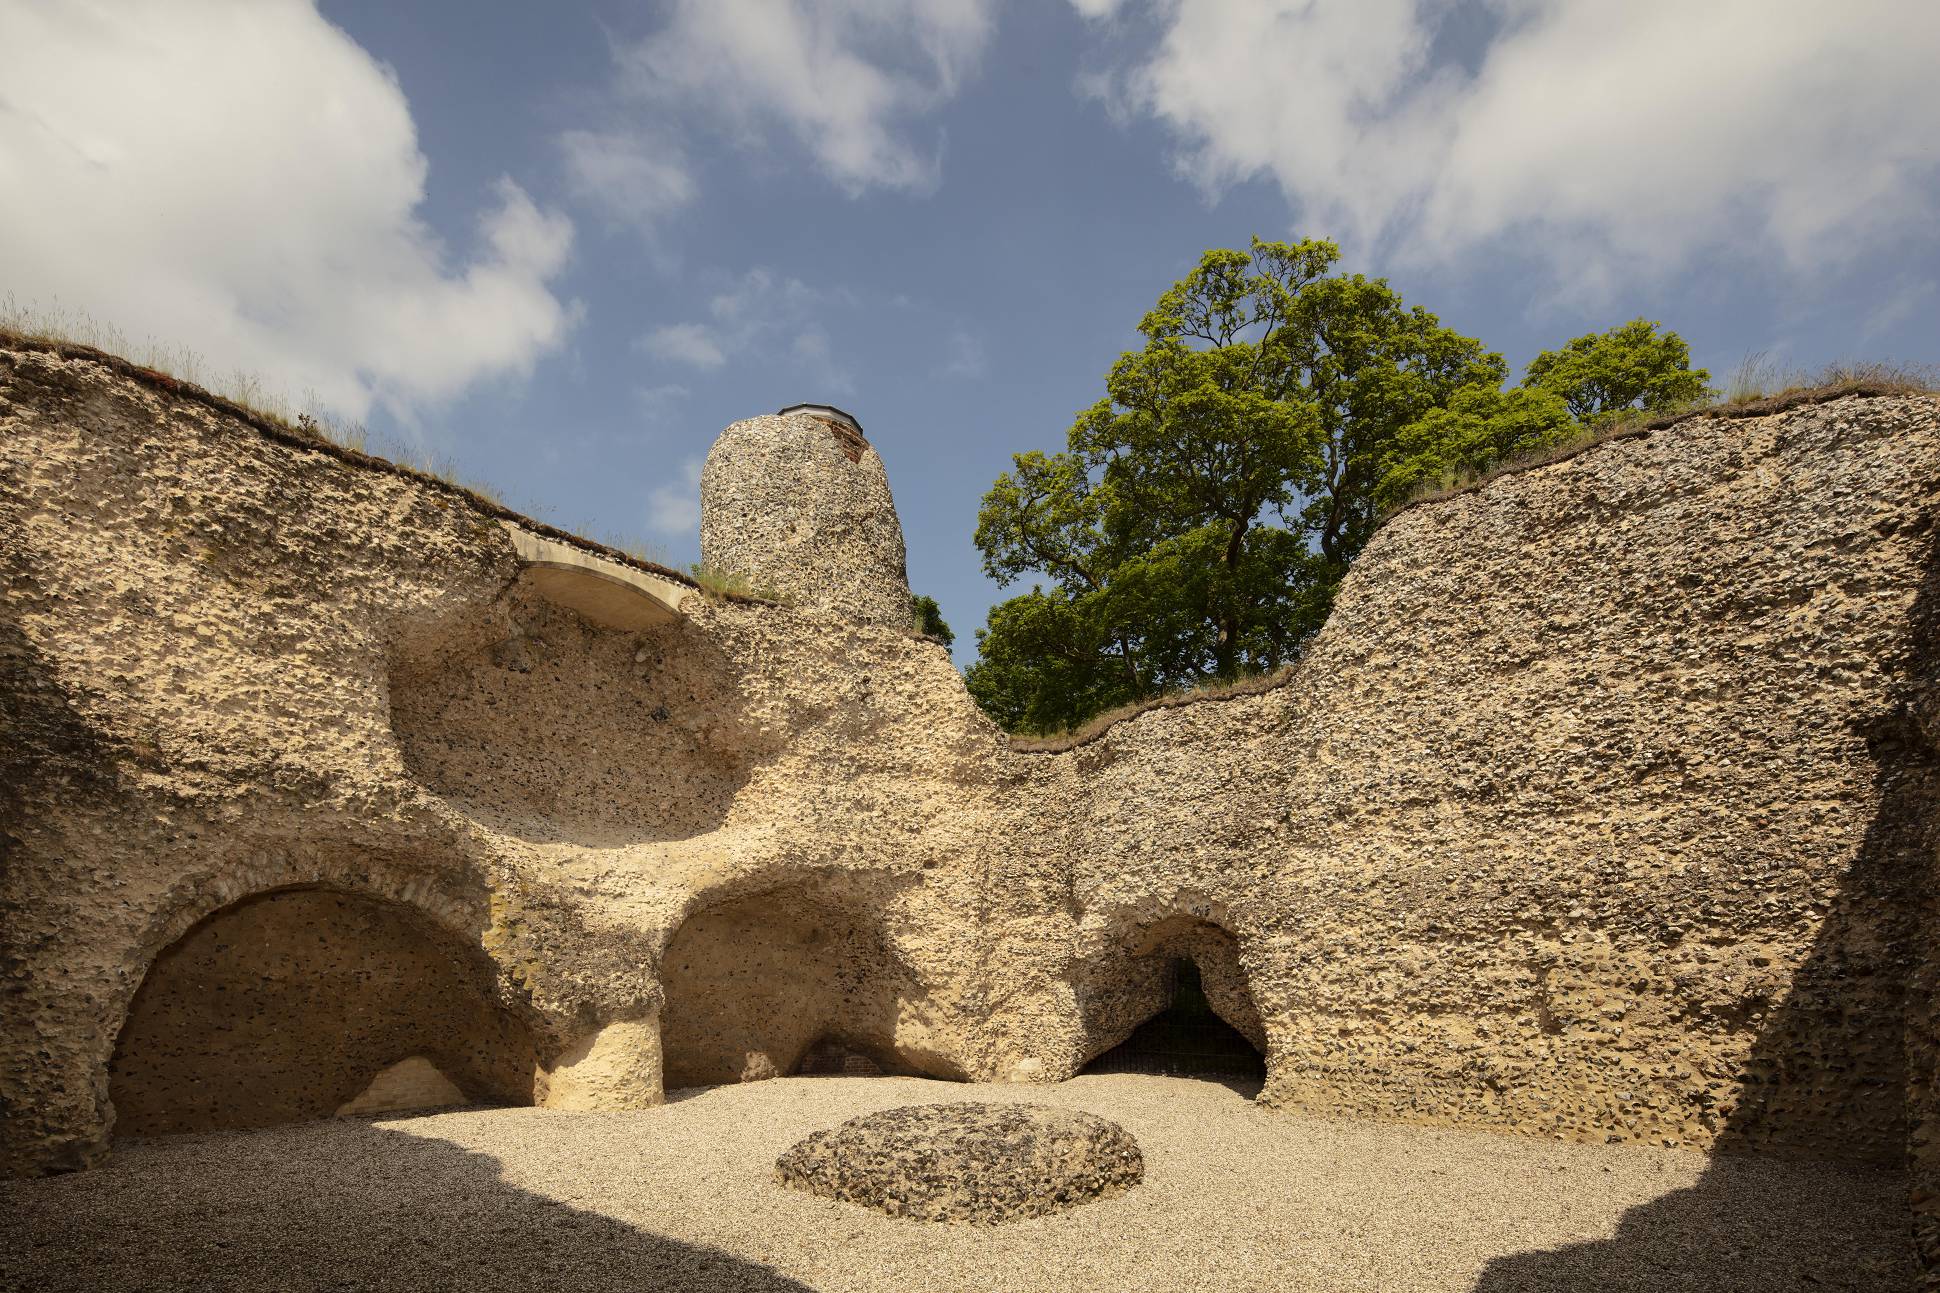 The interior of the sandstone medieval Walden Castle shows entrances that would have housed features such as a fireplace and staircase.